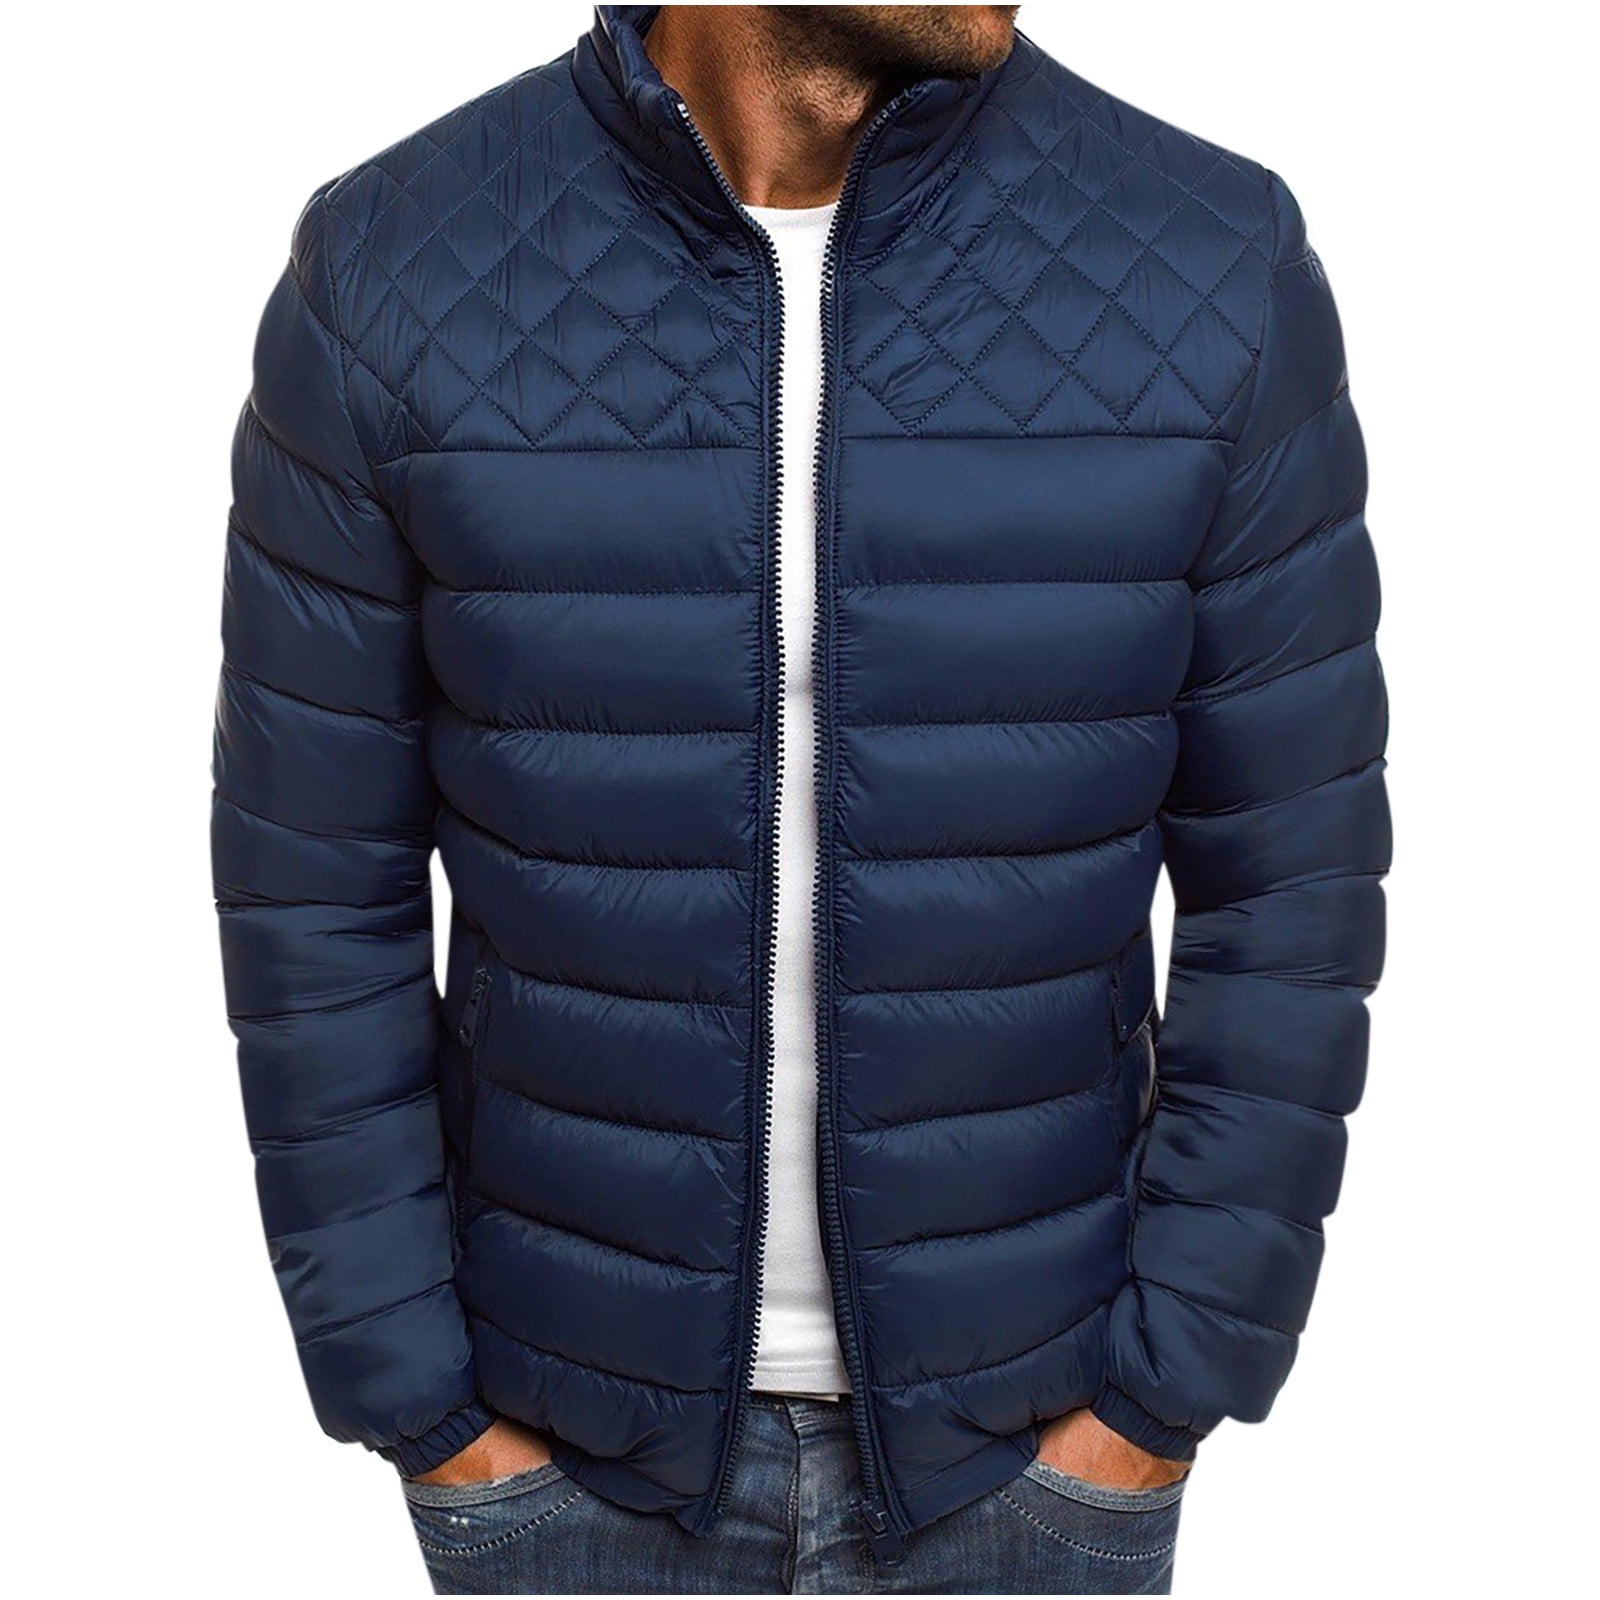 OGLCCG Men's Quilted Puffer Jackets Lightweight Packable Padded Coat ...